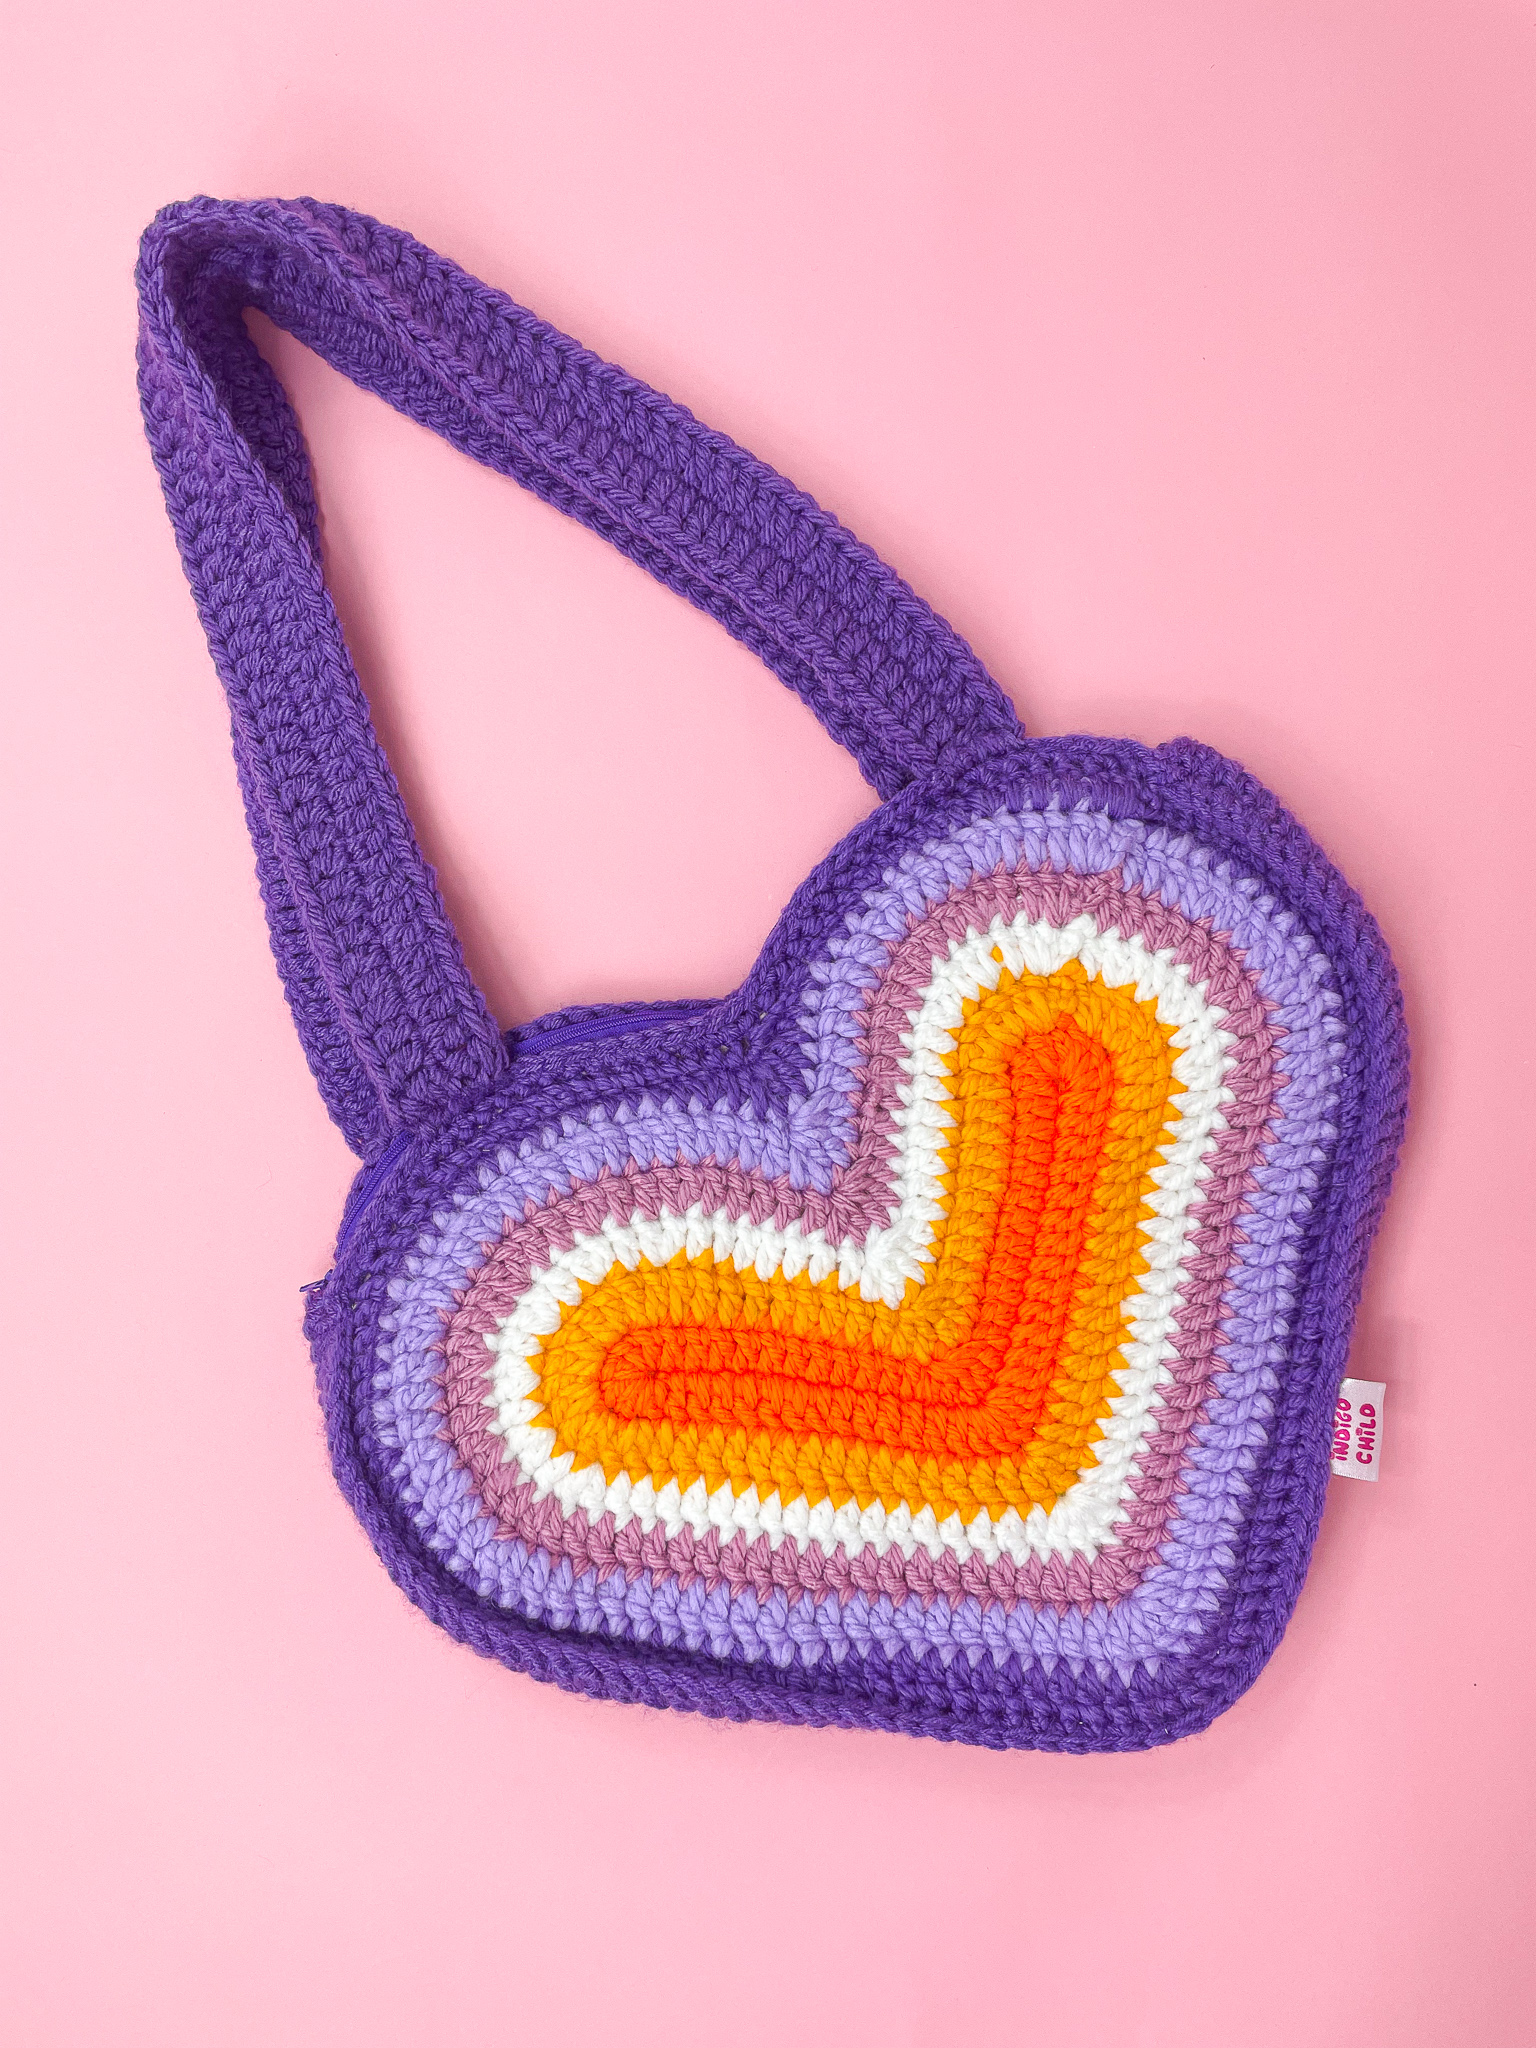 a knitted heart shaped bag